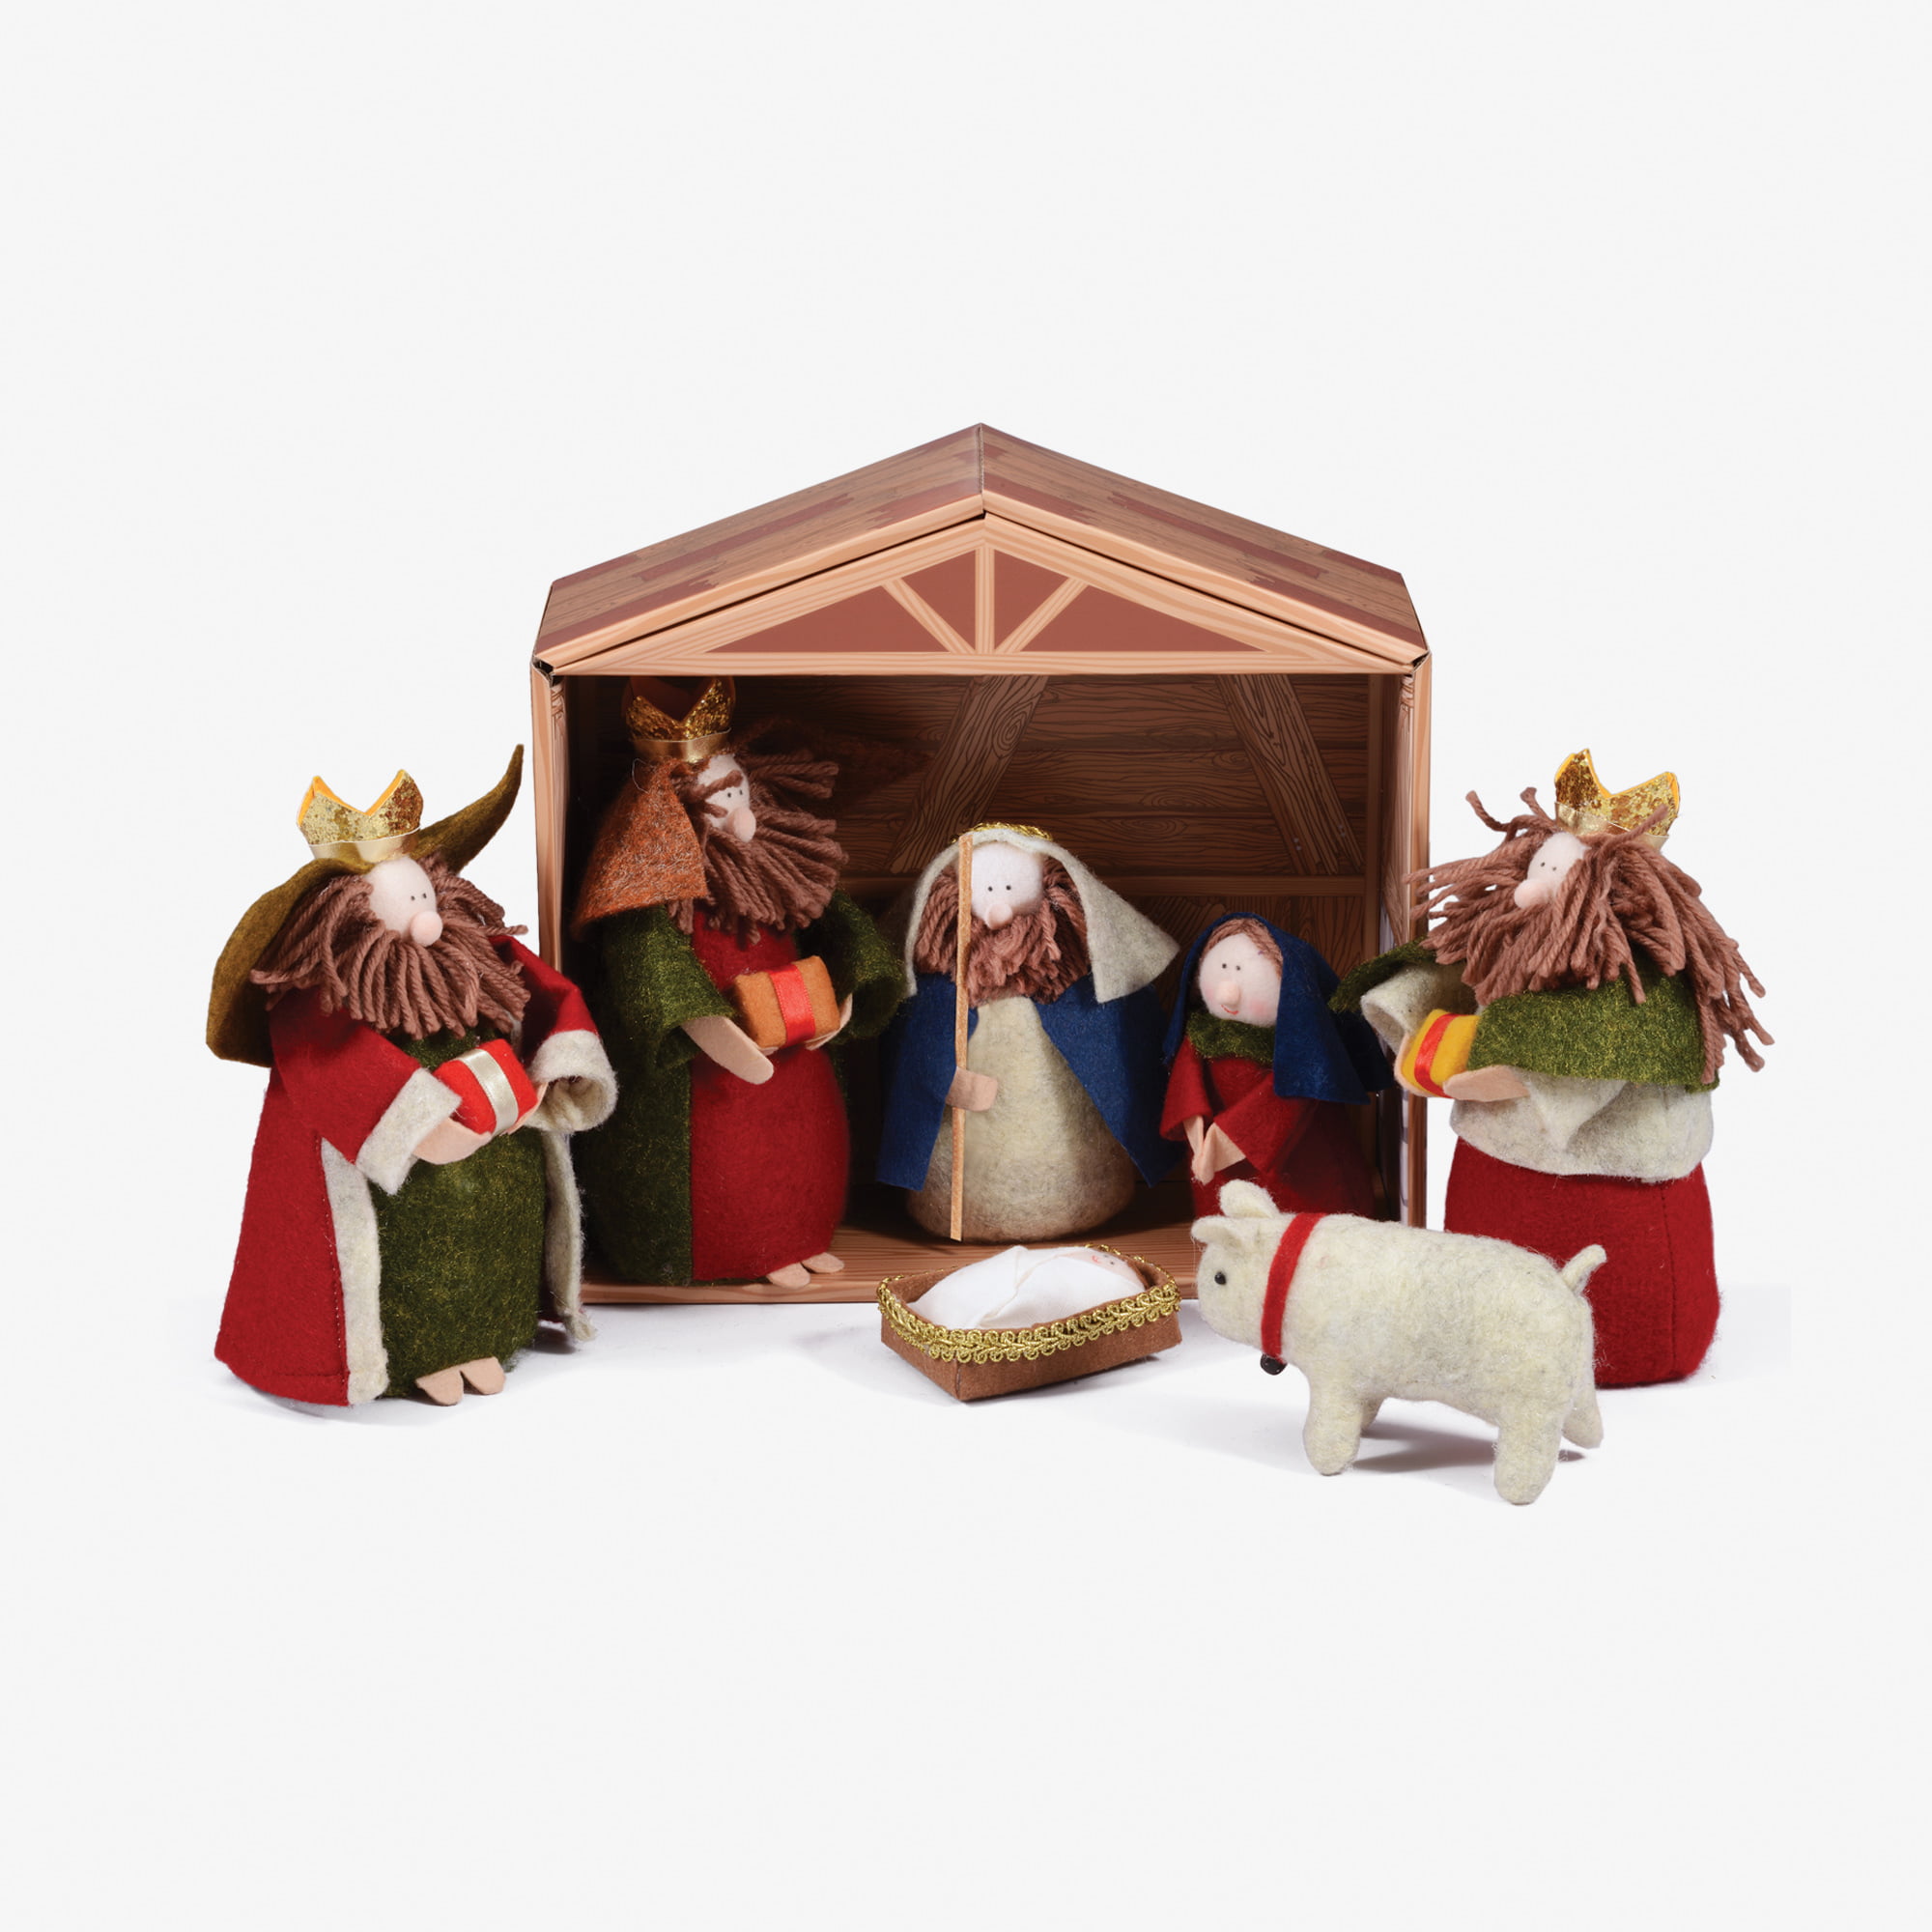 Baby Jesus Traditional Nativity Figures with New Merchants! VILLAGE GIFT IMPORTERS 5 Christmas Nativity Collection 36 Different Statues Hand-Painted and Made in Italy 